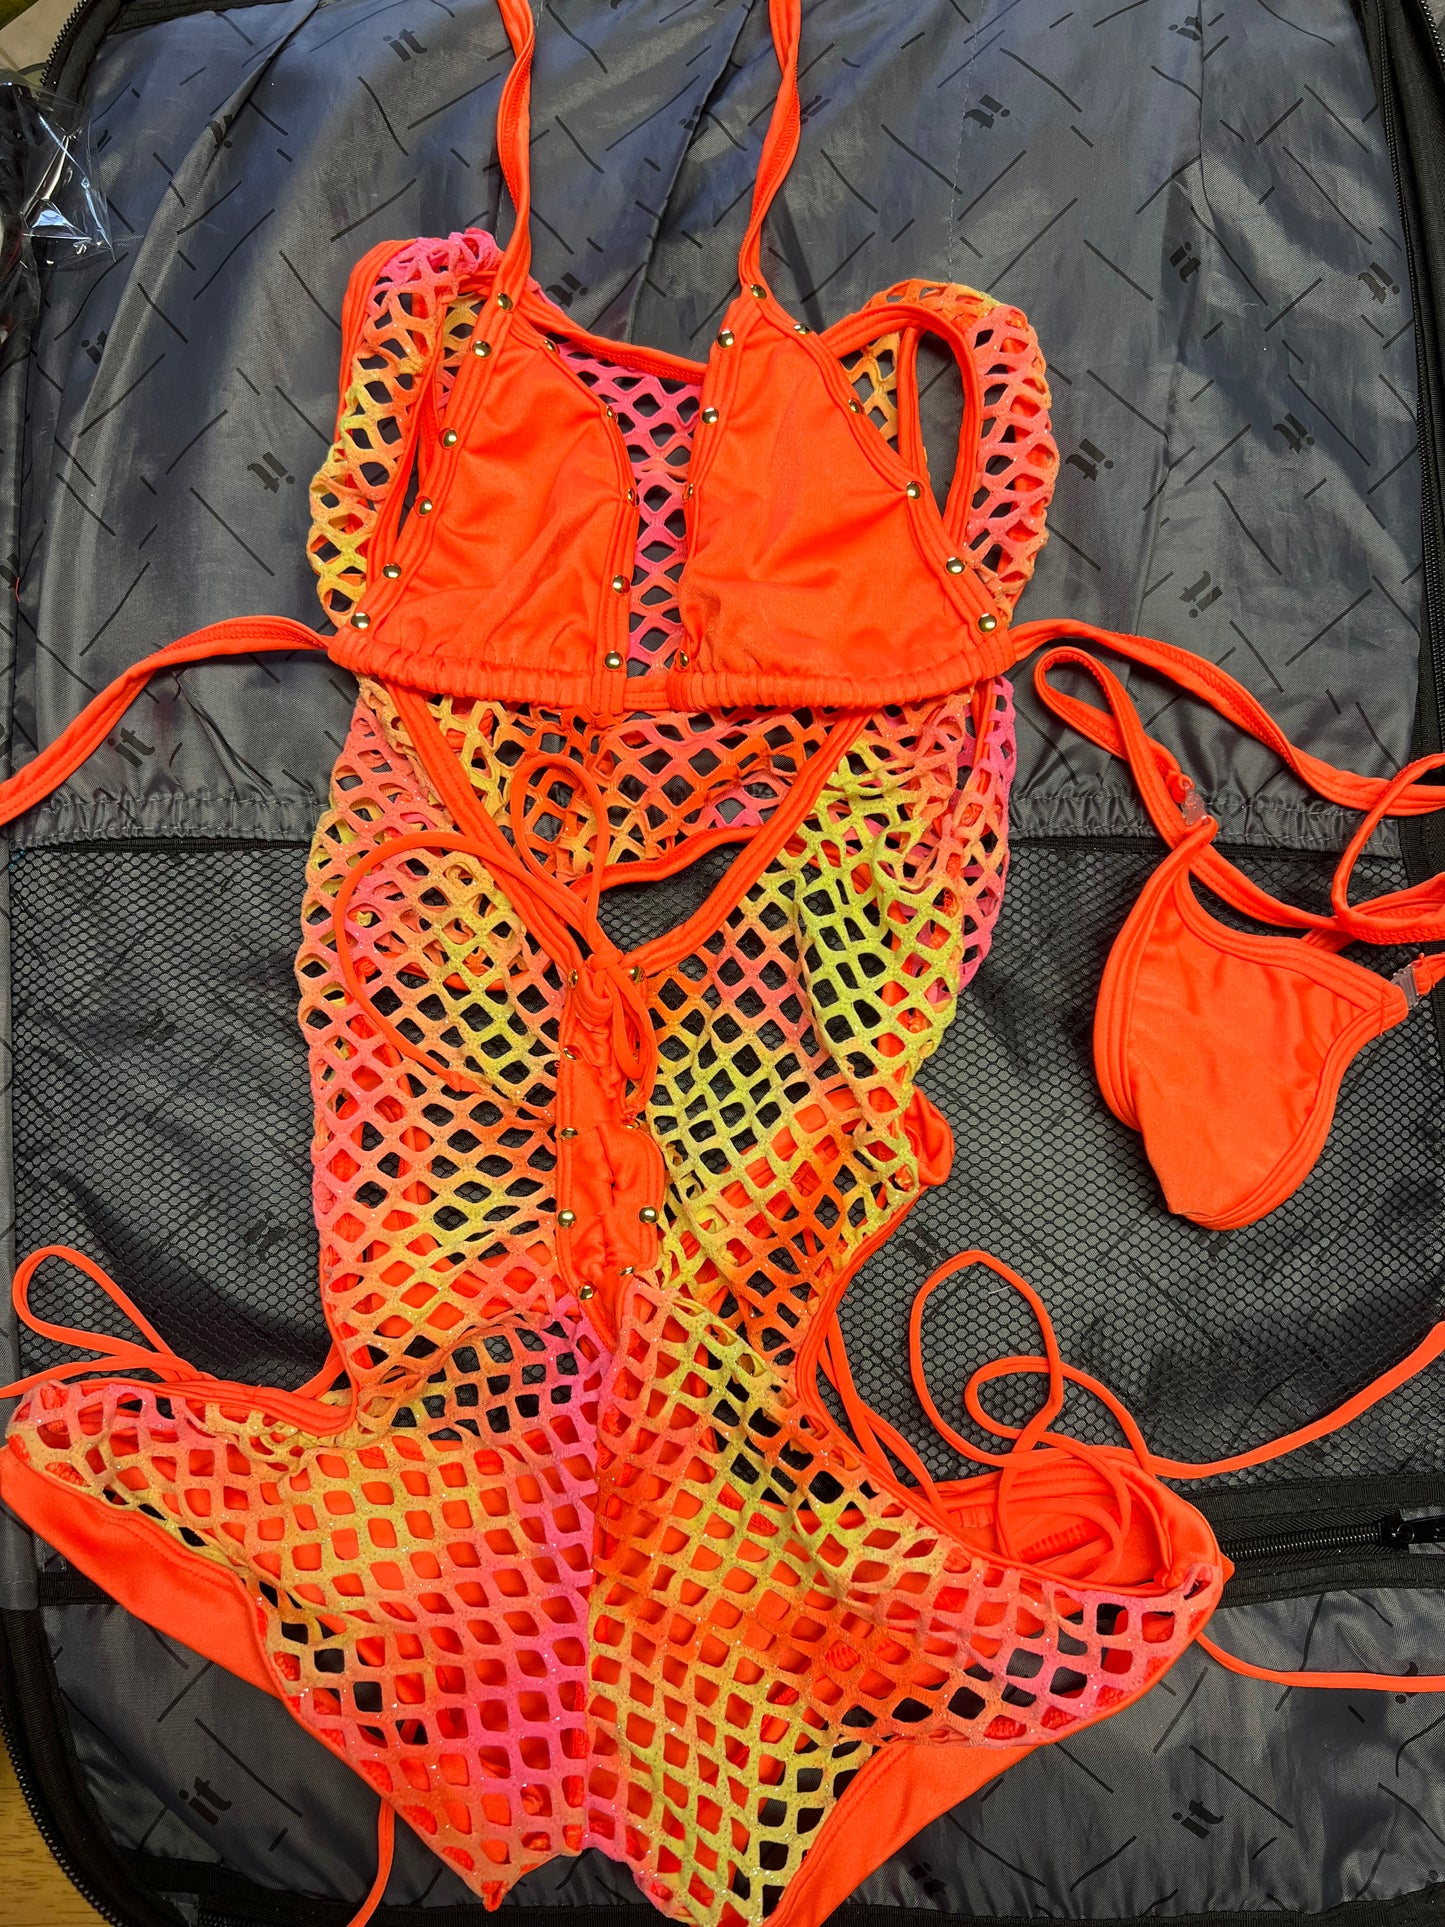 One-Piece Fishnet Outfit with Bikini Top Exotic Dancewear